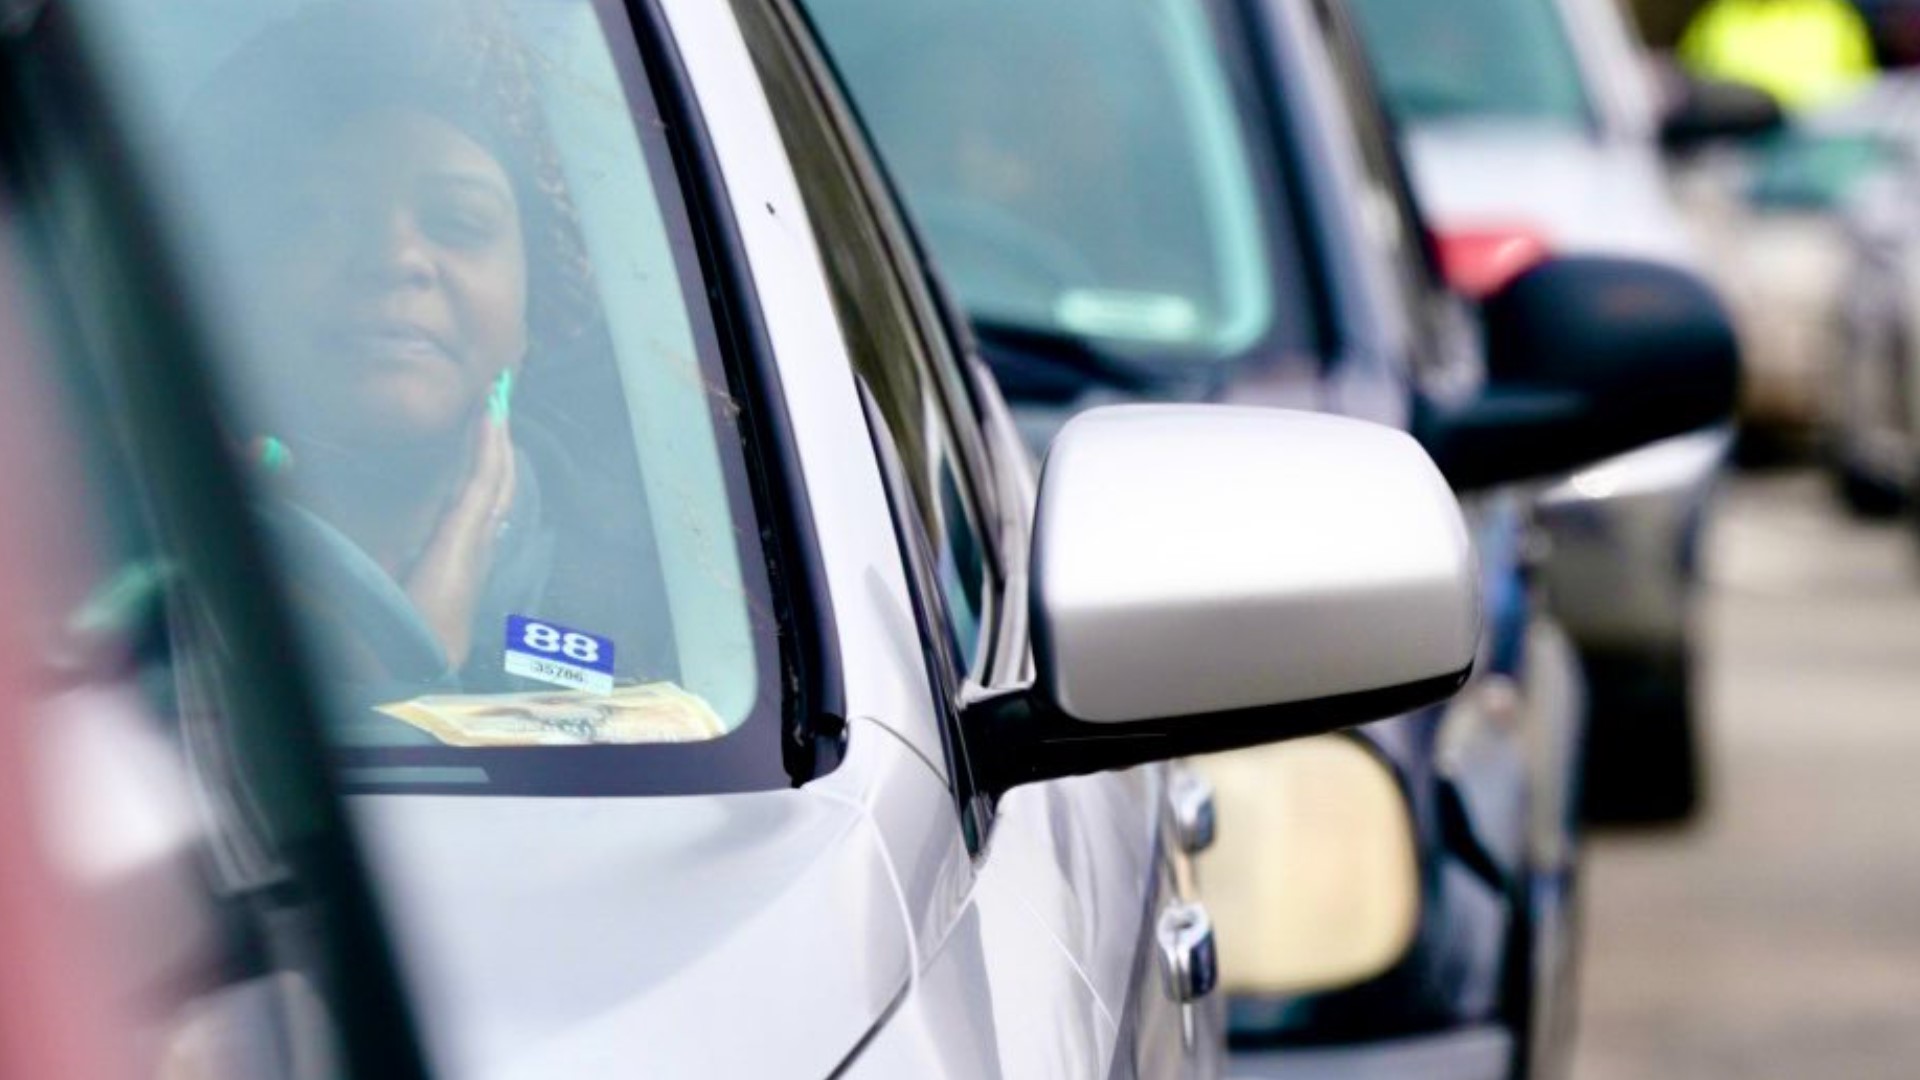 An Indianapolis church gave hundreds of drivers a reason to smile on Saturday.